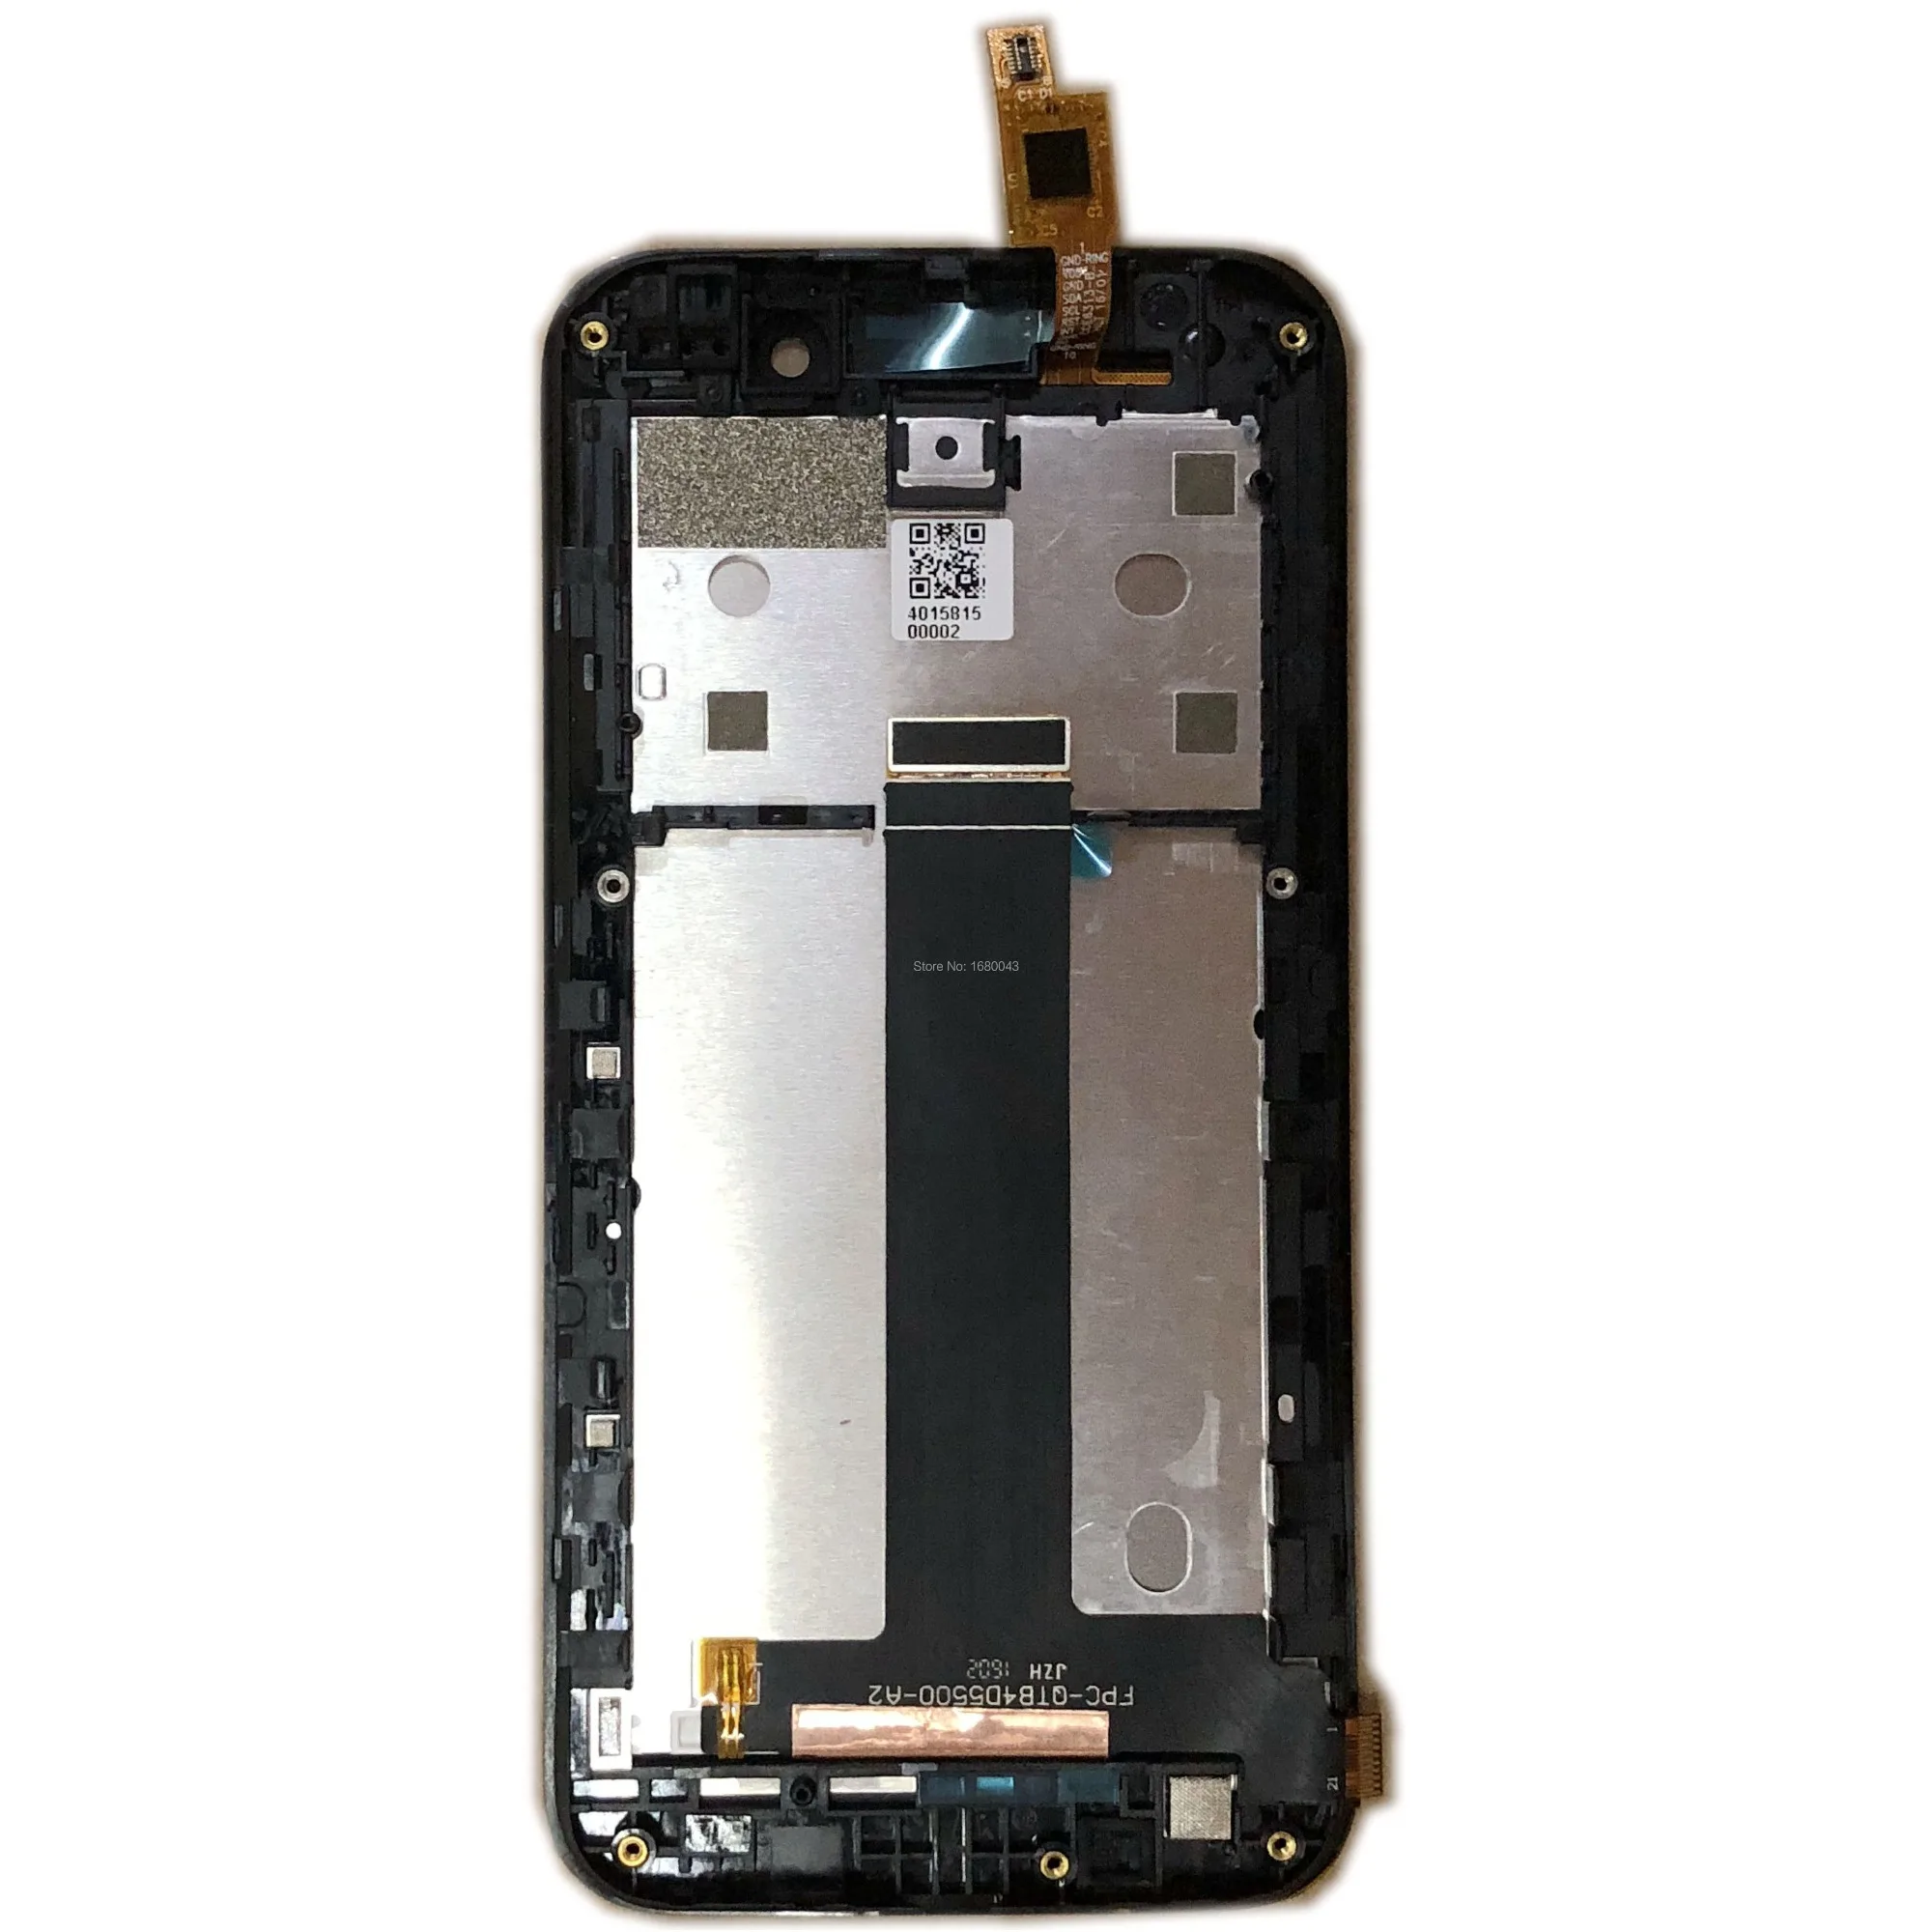 

4.5" LCD LED Display Touch Screen Digitizer Assembly Frame For Asus Zenfone Go ZB452KG X014D BLACK COLOR